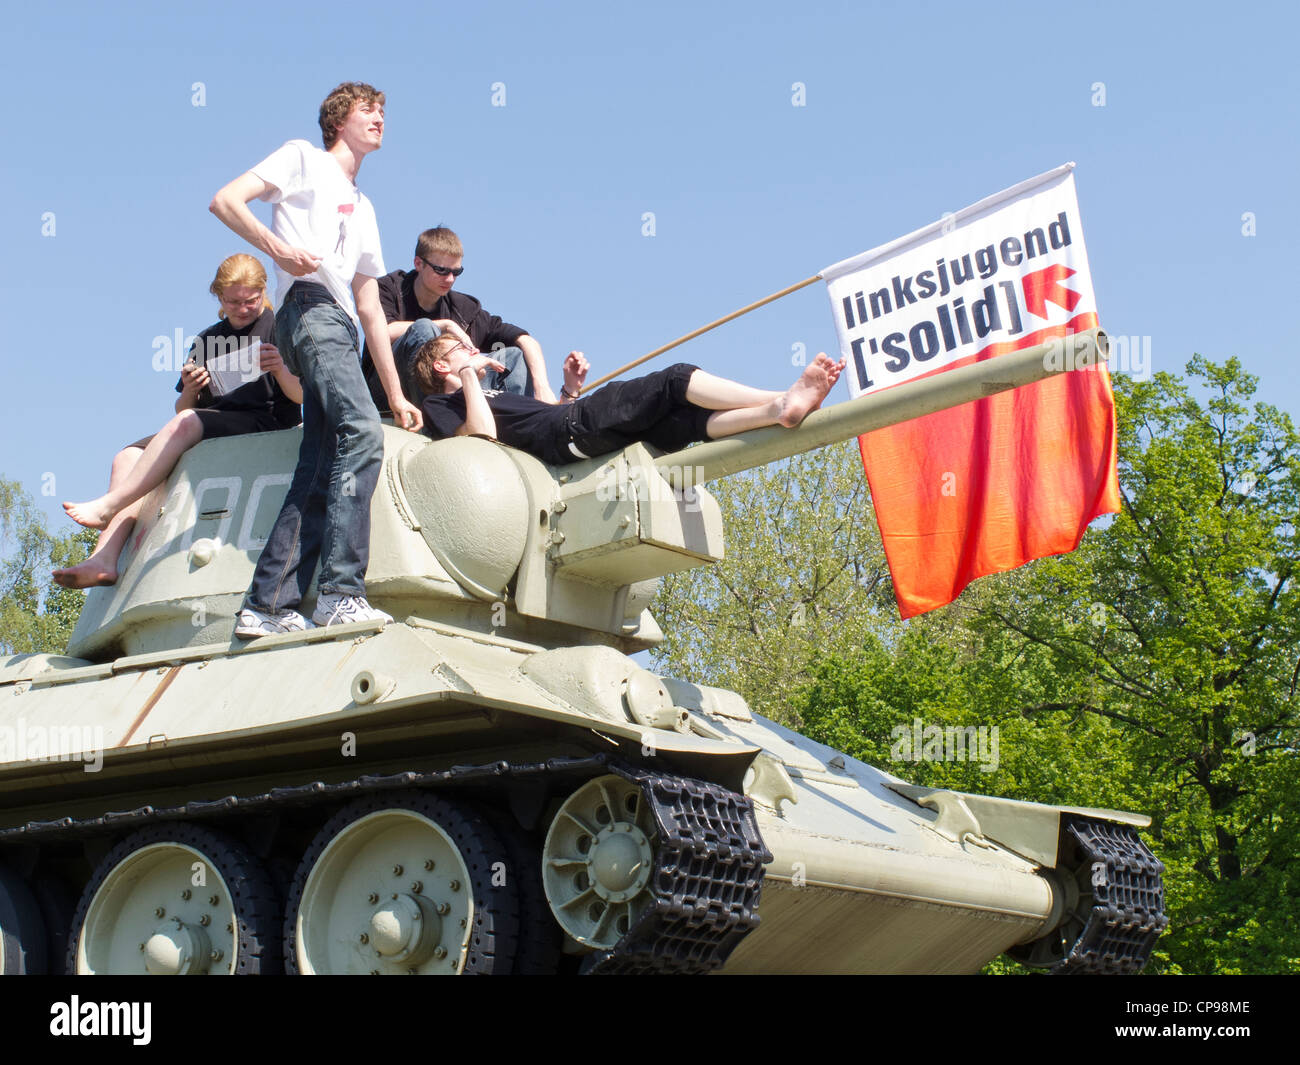 Berlin - The Russian War Memorial and tank. 17 Juni Strasse - May day celebrations with young men on the tank Stock Photo